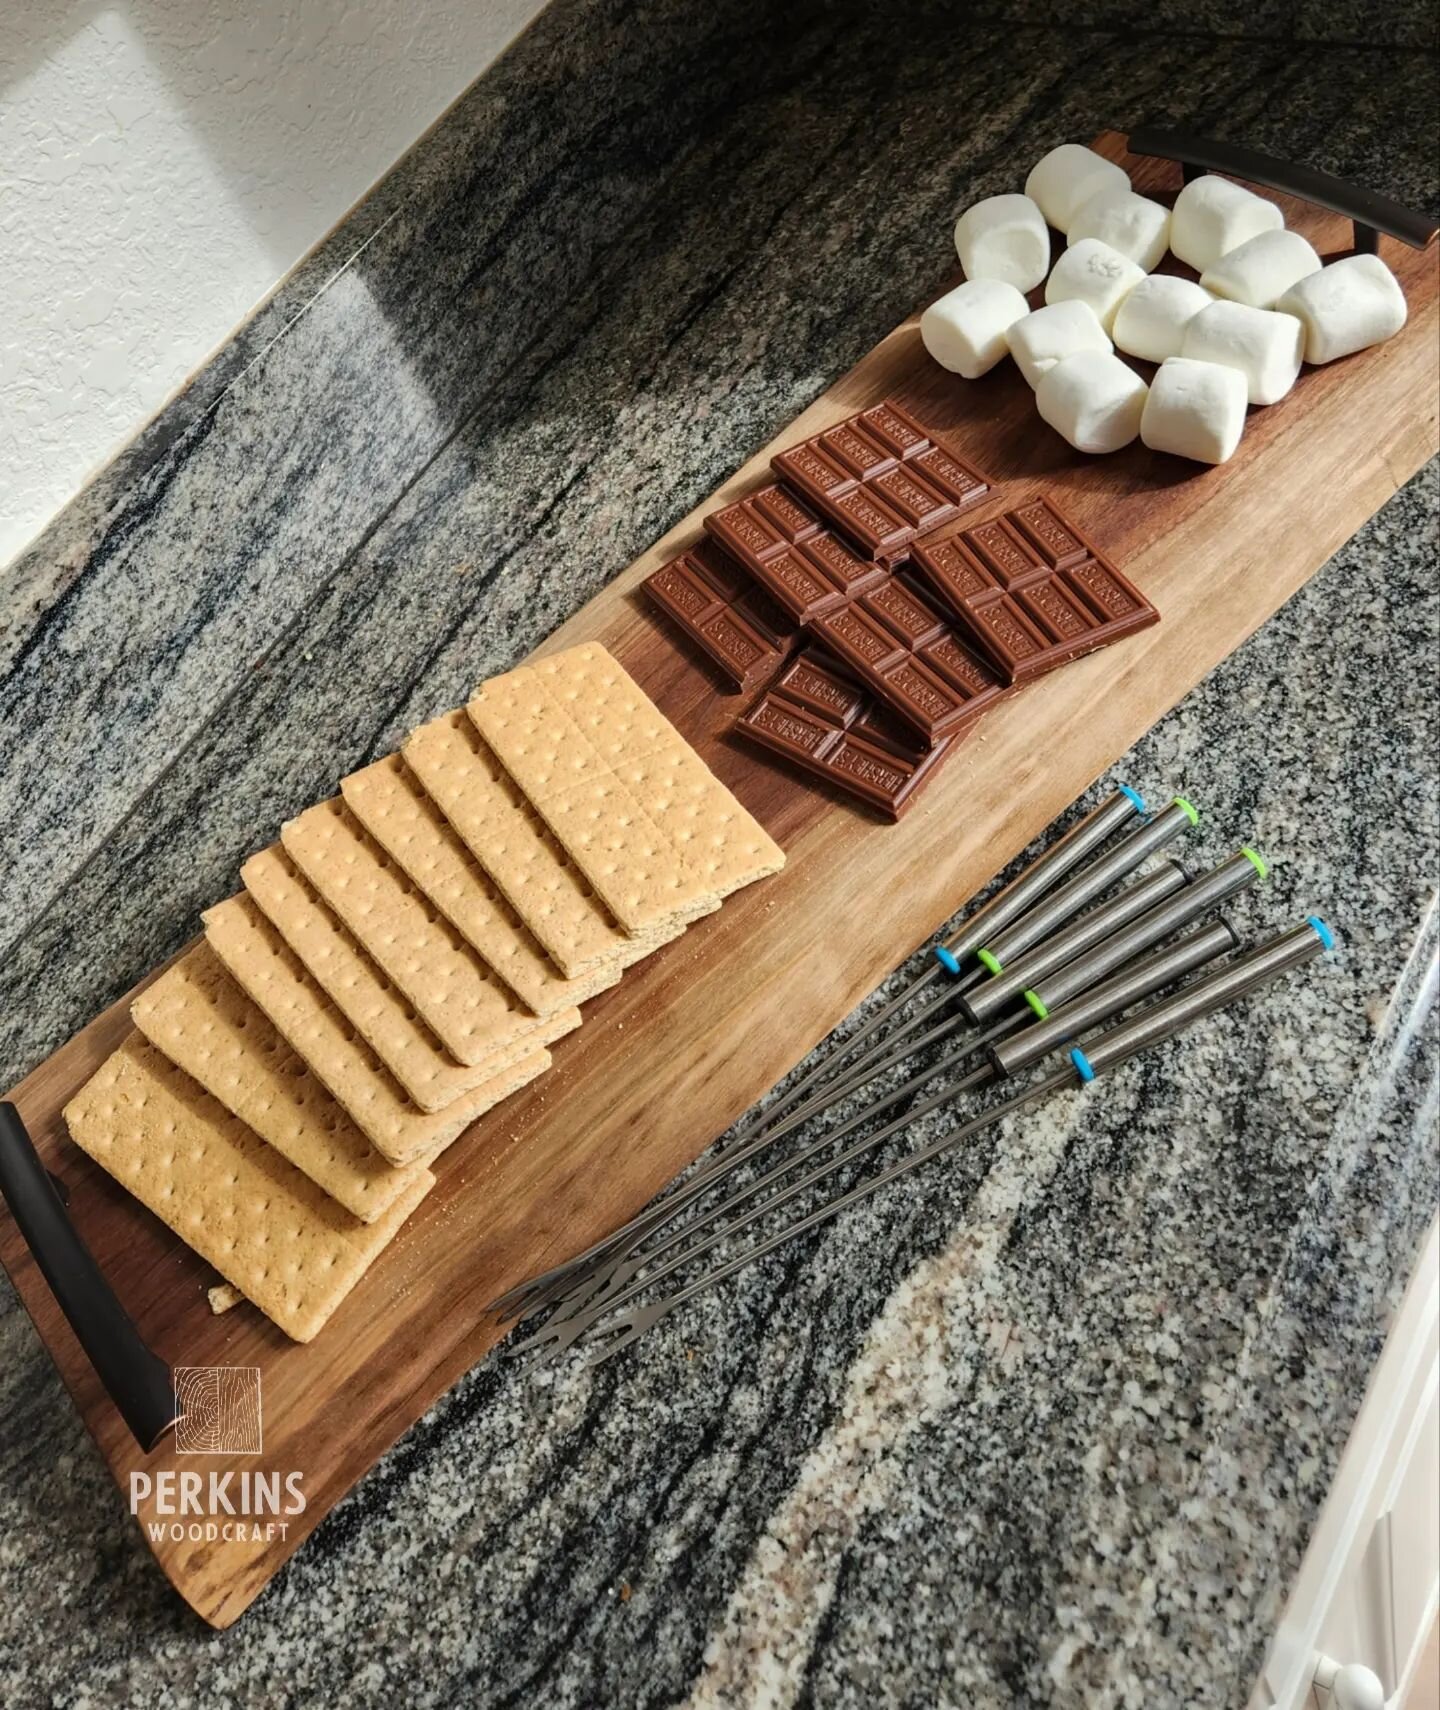 Which is your favorite: s'more board or cheese board? 🍫🧀 
#cheeseboard #smores #charcuterieboard #cheese #handcrafted #liveedge #servingboard #walnut #madeinusa #valentinesday #valentinesgift